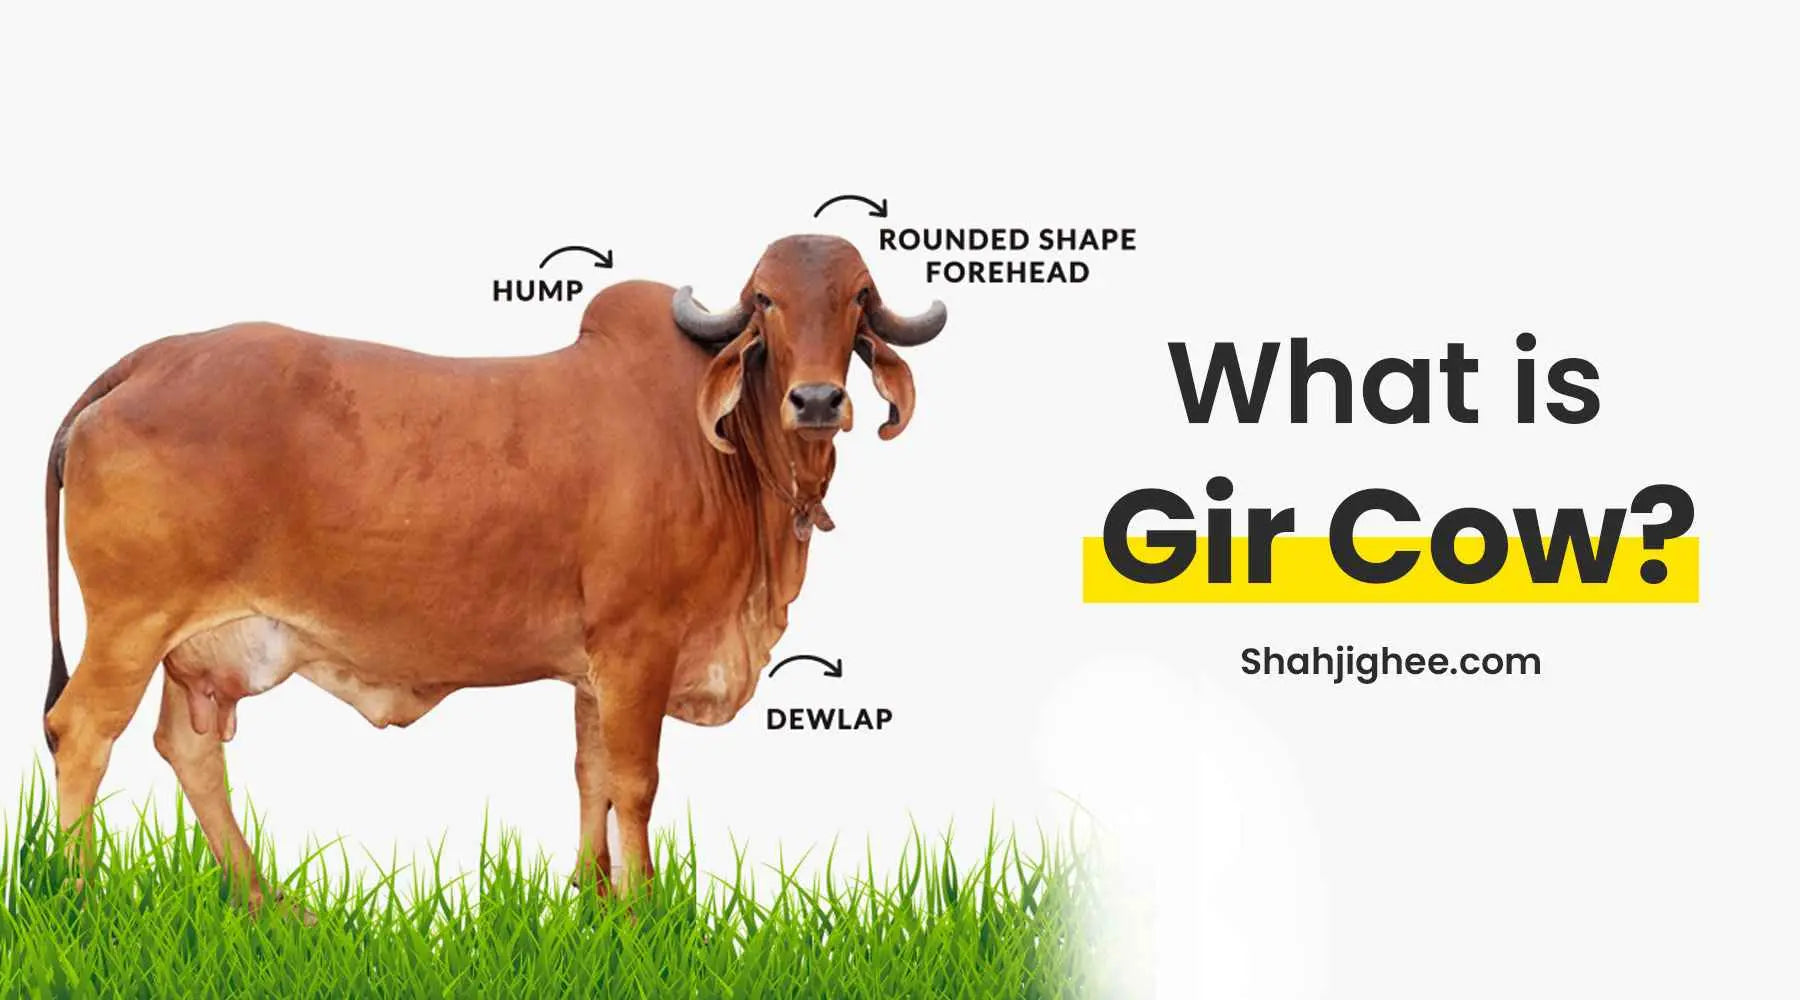 Top 999+ gir cow images – Amazing Collection gir cow images Full 4K